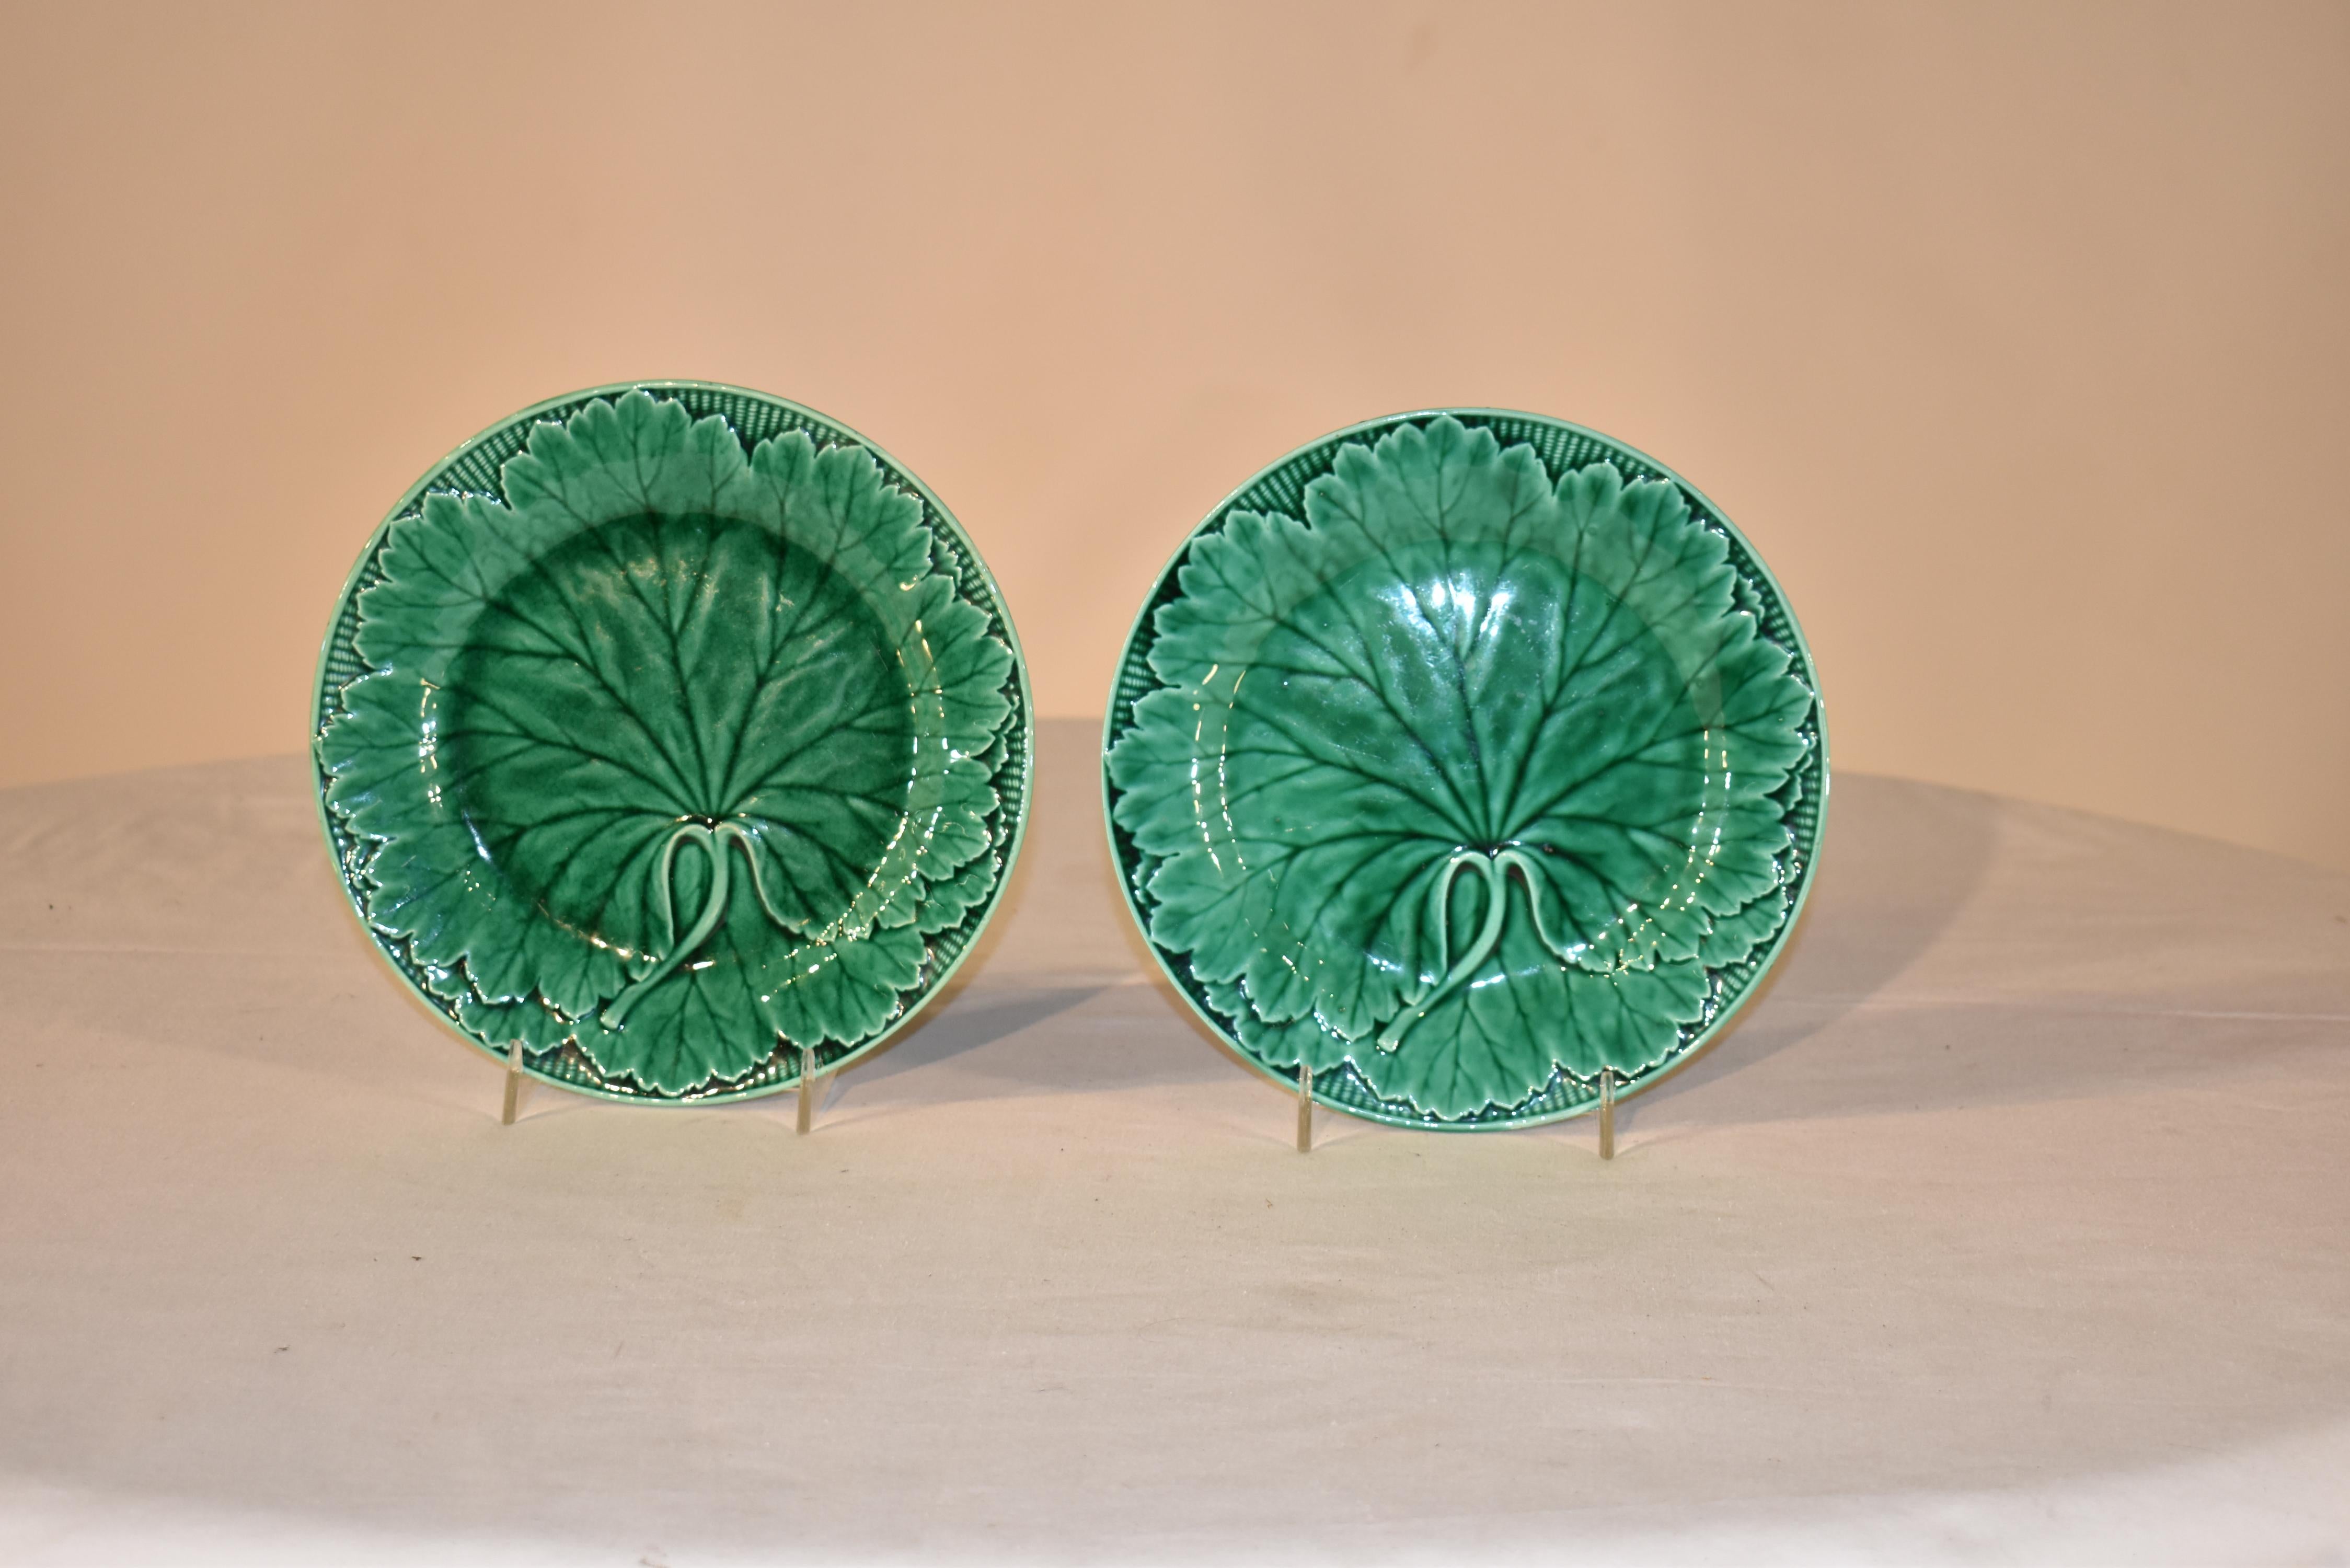 Pair of 19th Century Wedgwood Majolica Plates In Good Condition For Sale In High Point, NC